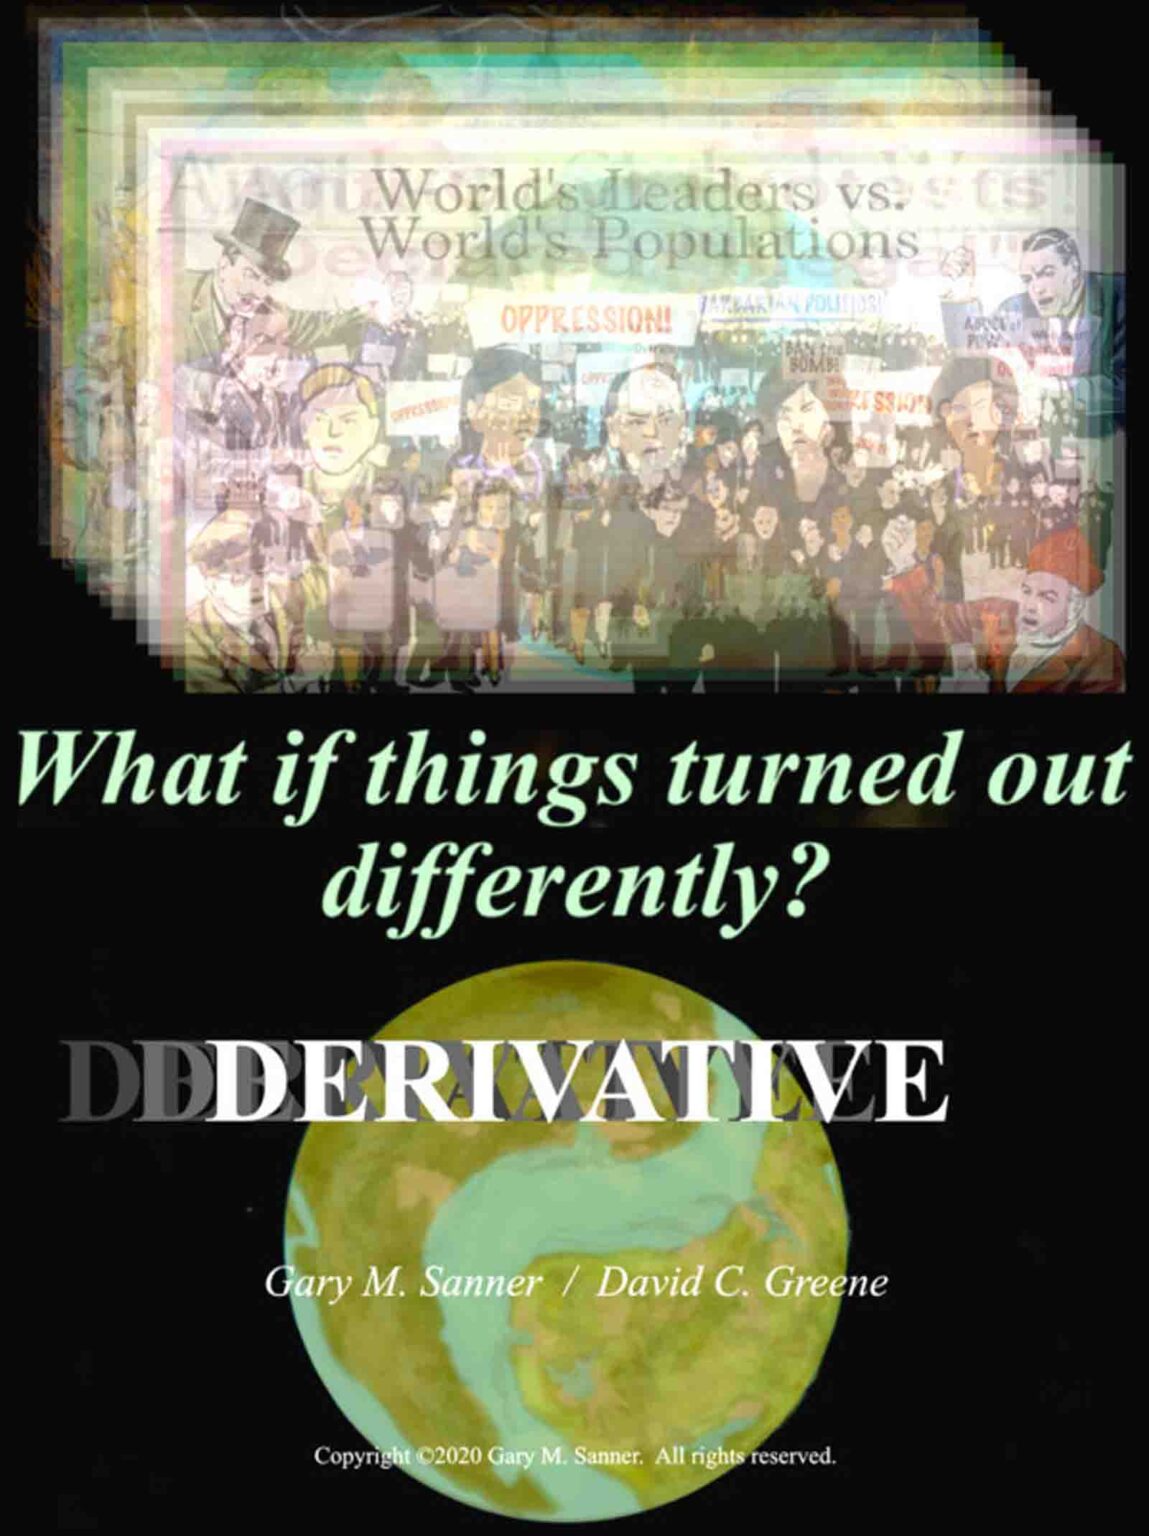 The animated short film 'Derivative', directed by Gary M. Sanner is an interesting insight into current events.